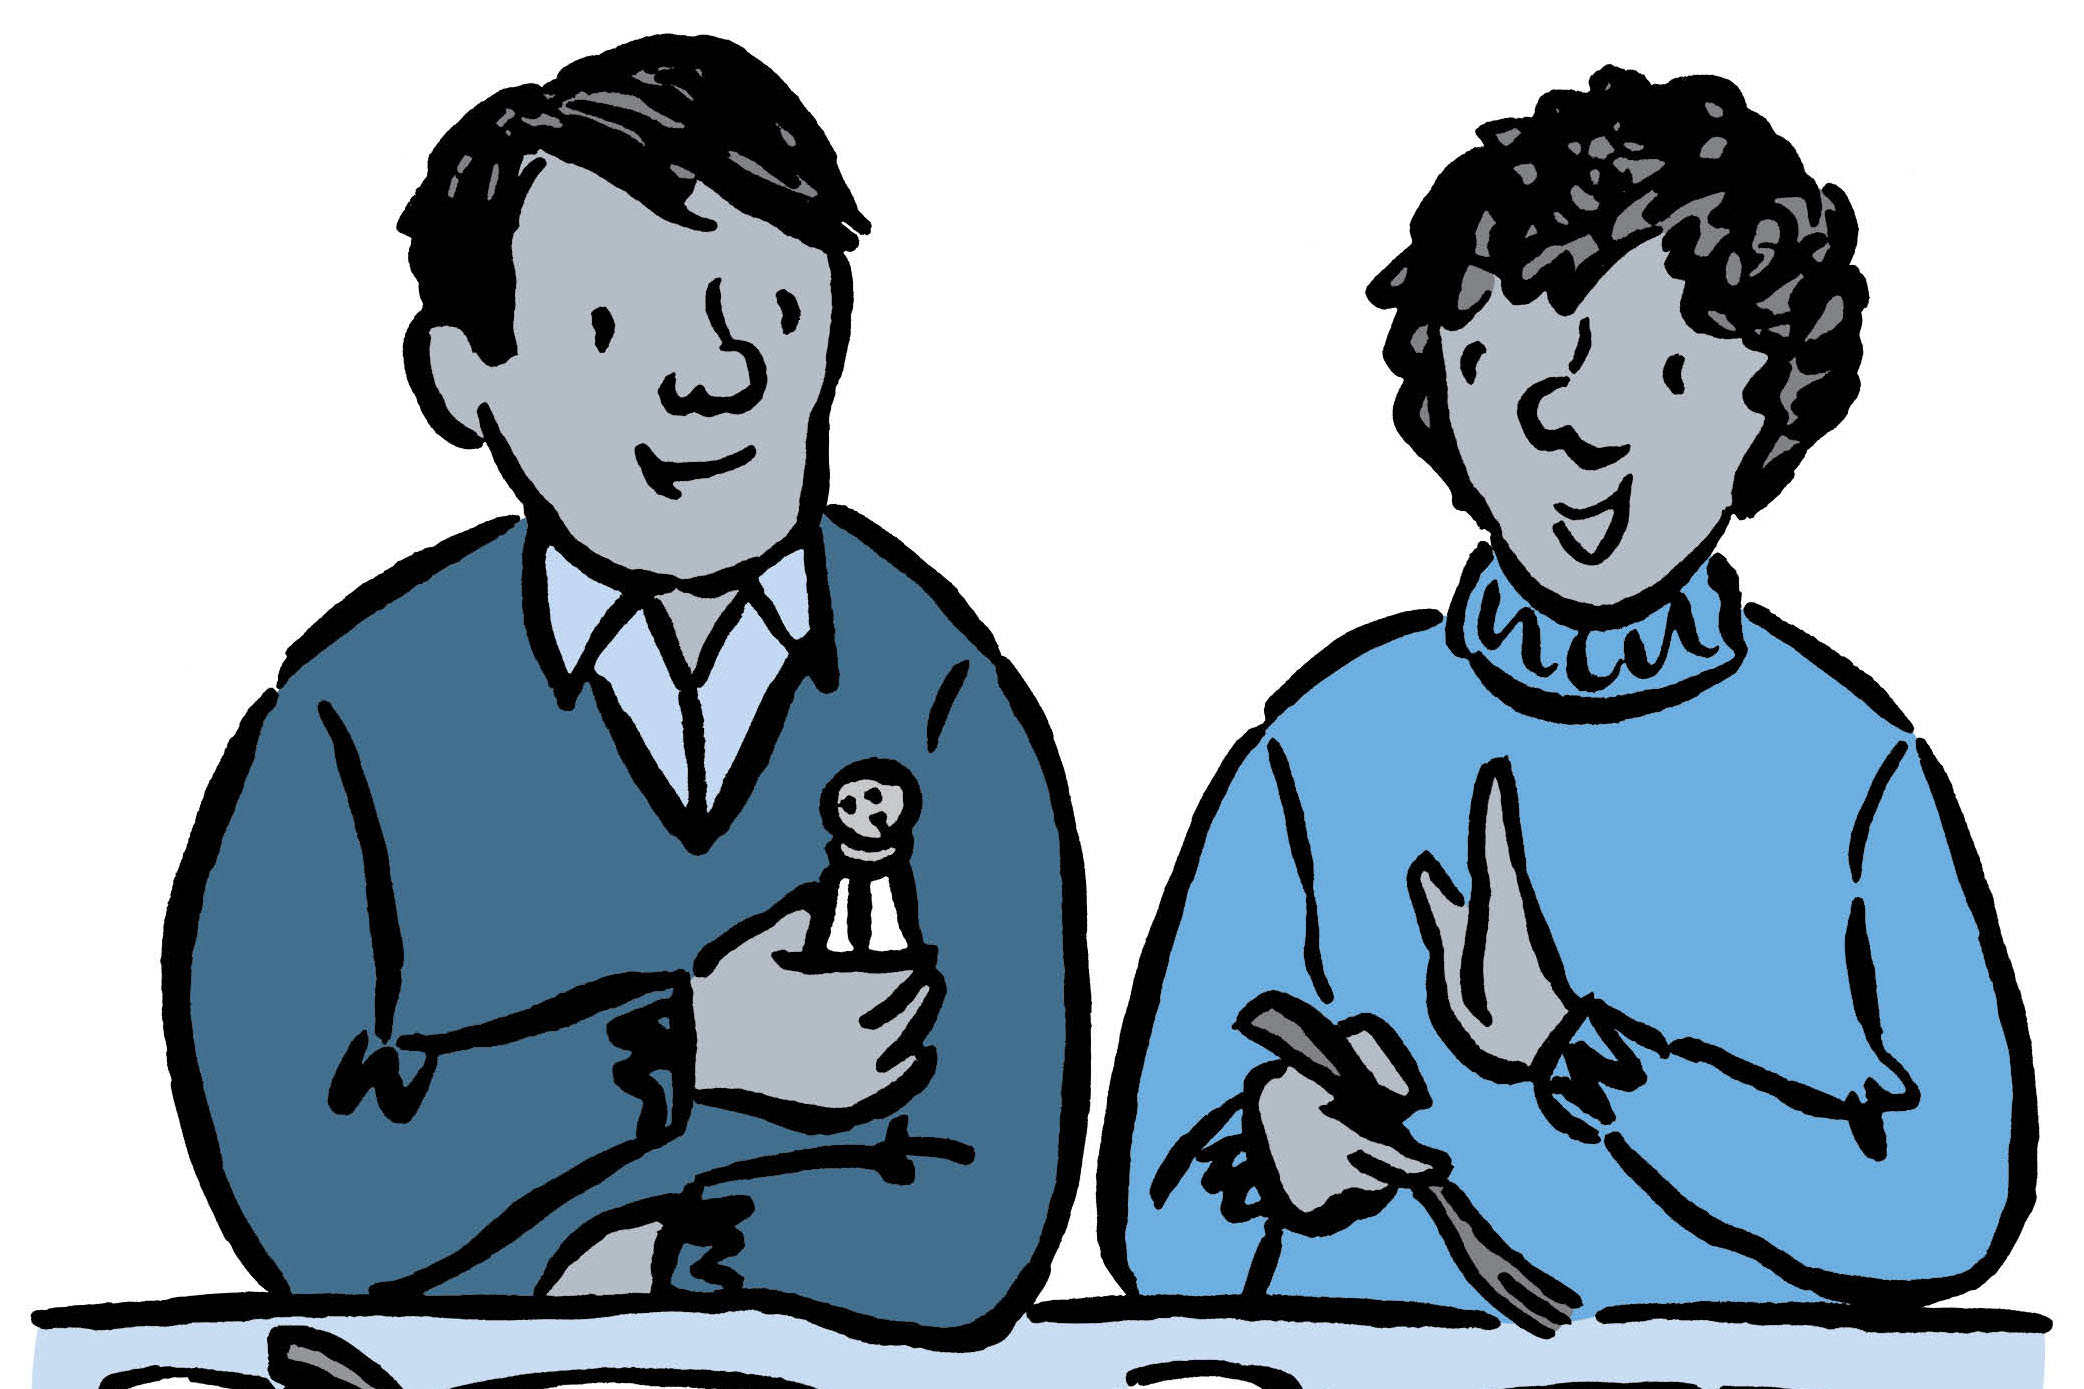 Illustration of a woman saying no to using a salt shaker